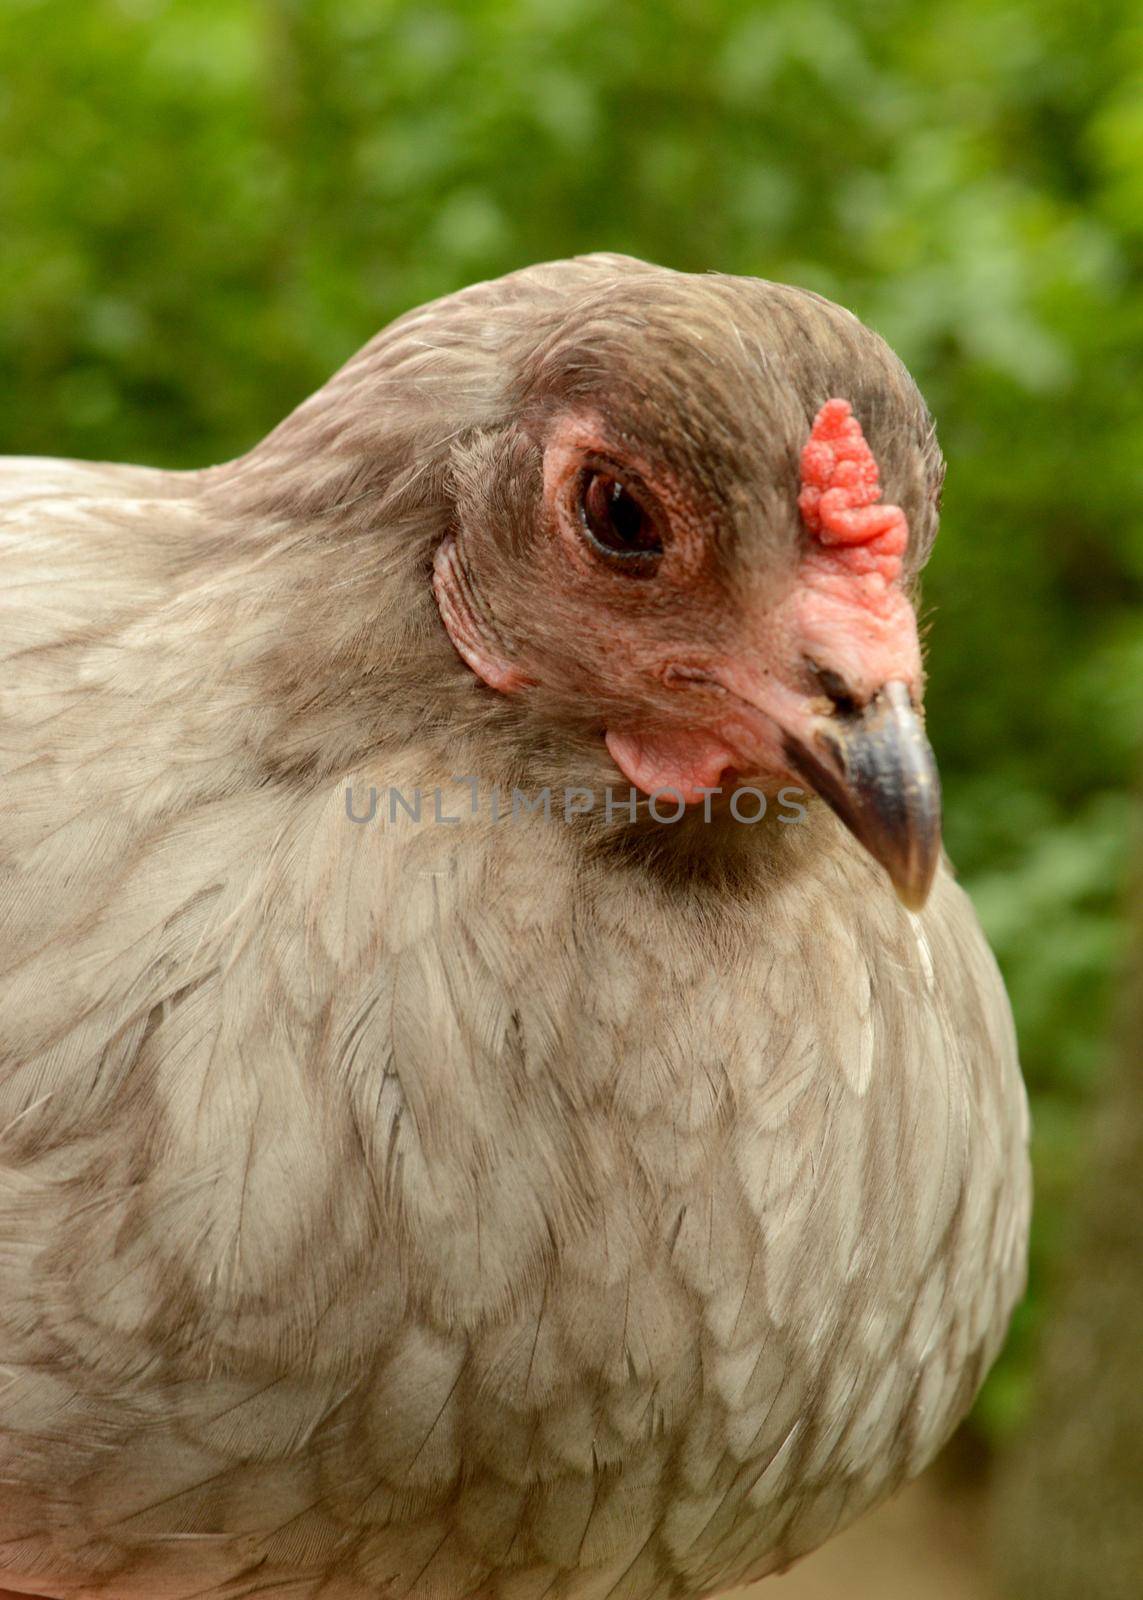 Closeup of a Mother Hen Easter Egger Chicken resting during the daytime hours.